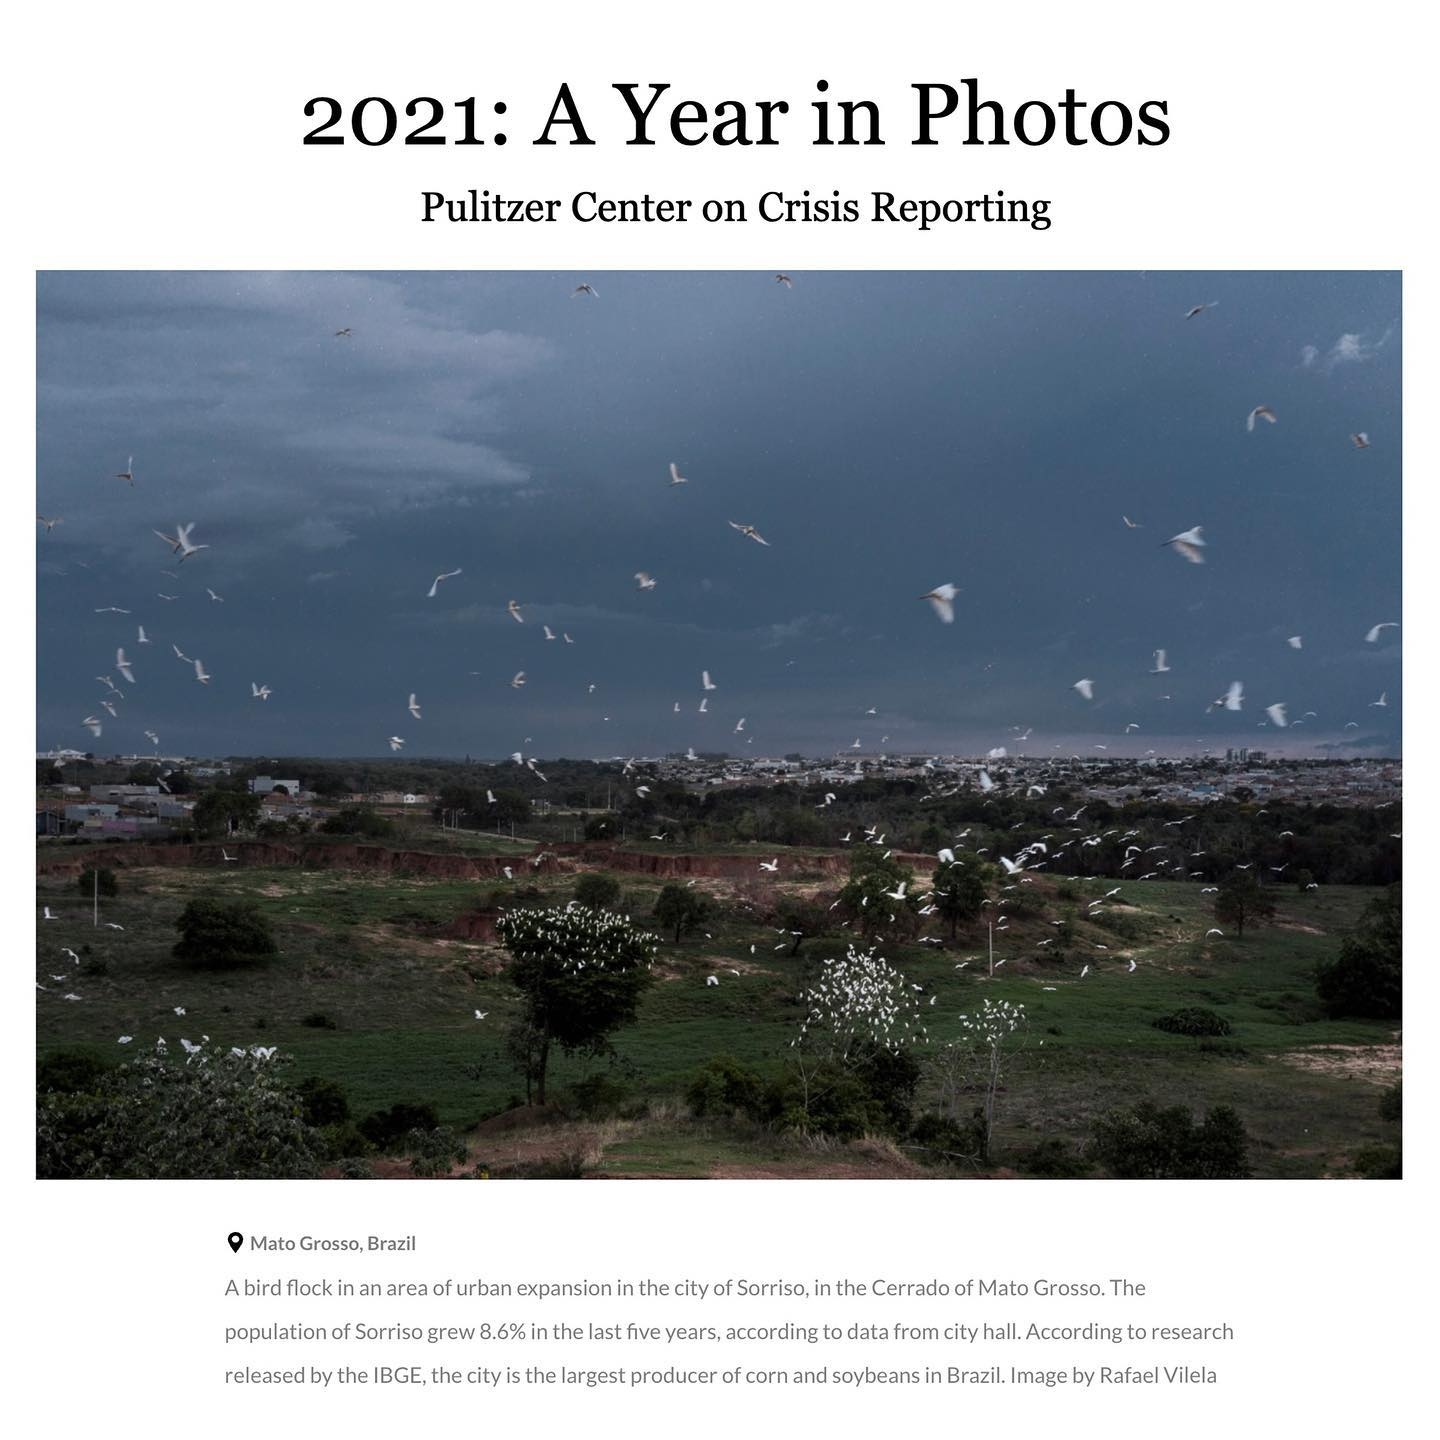 Tearsheets - 2021 Pulitzer Center Year in Photos